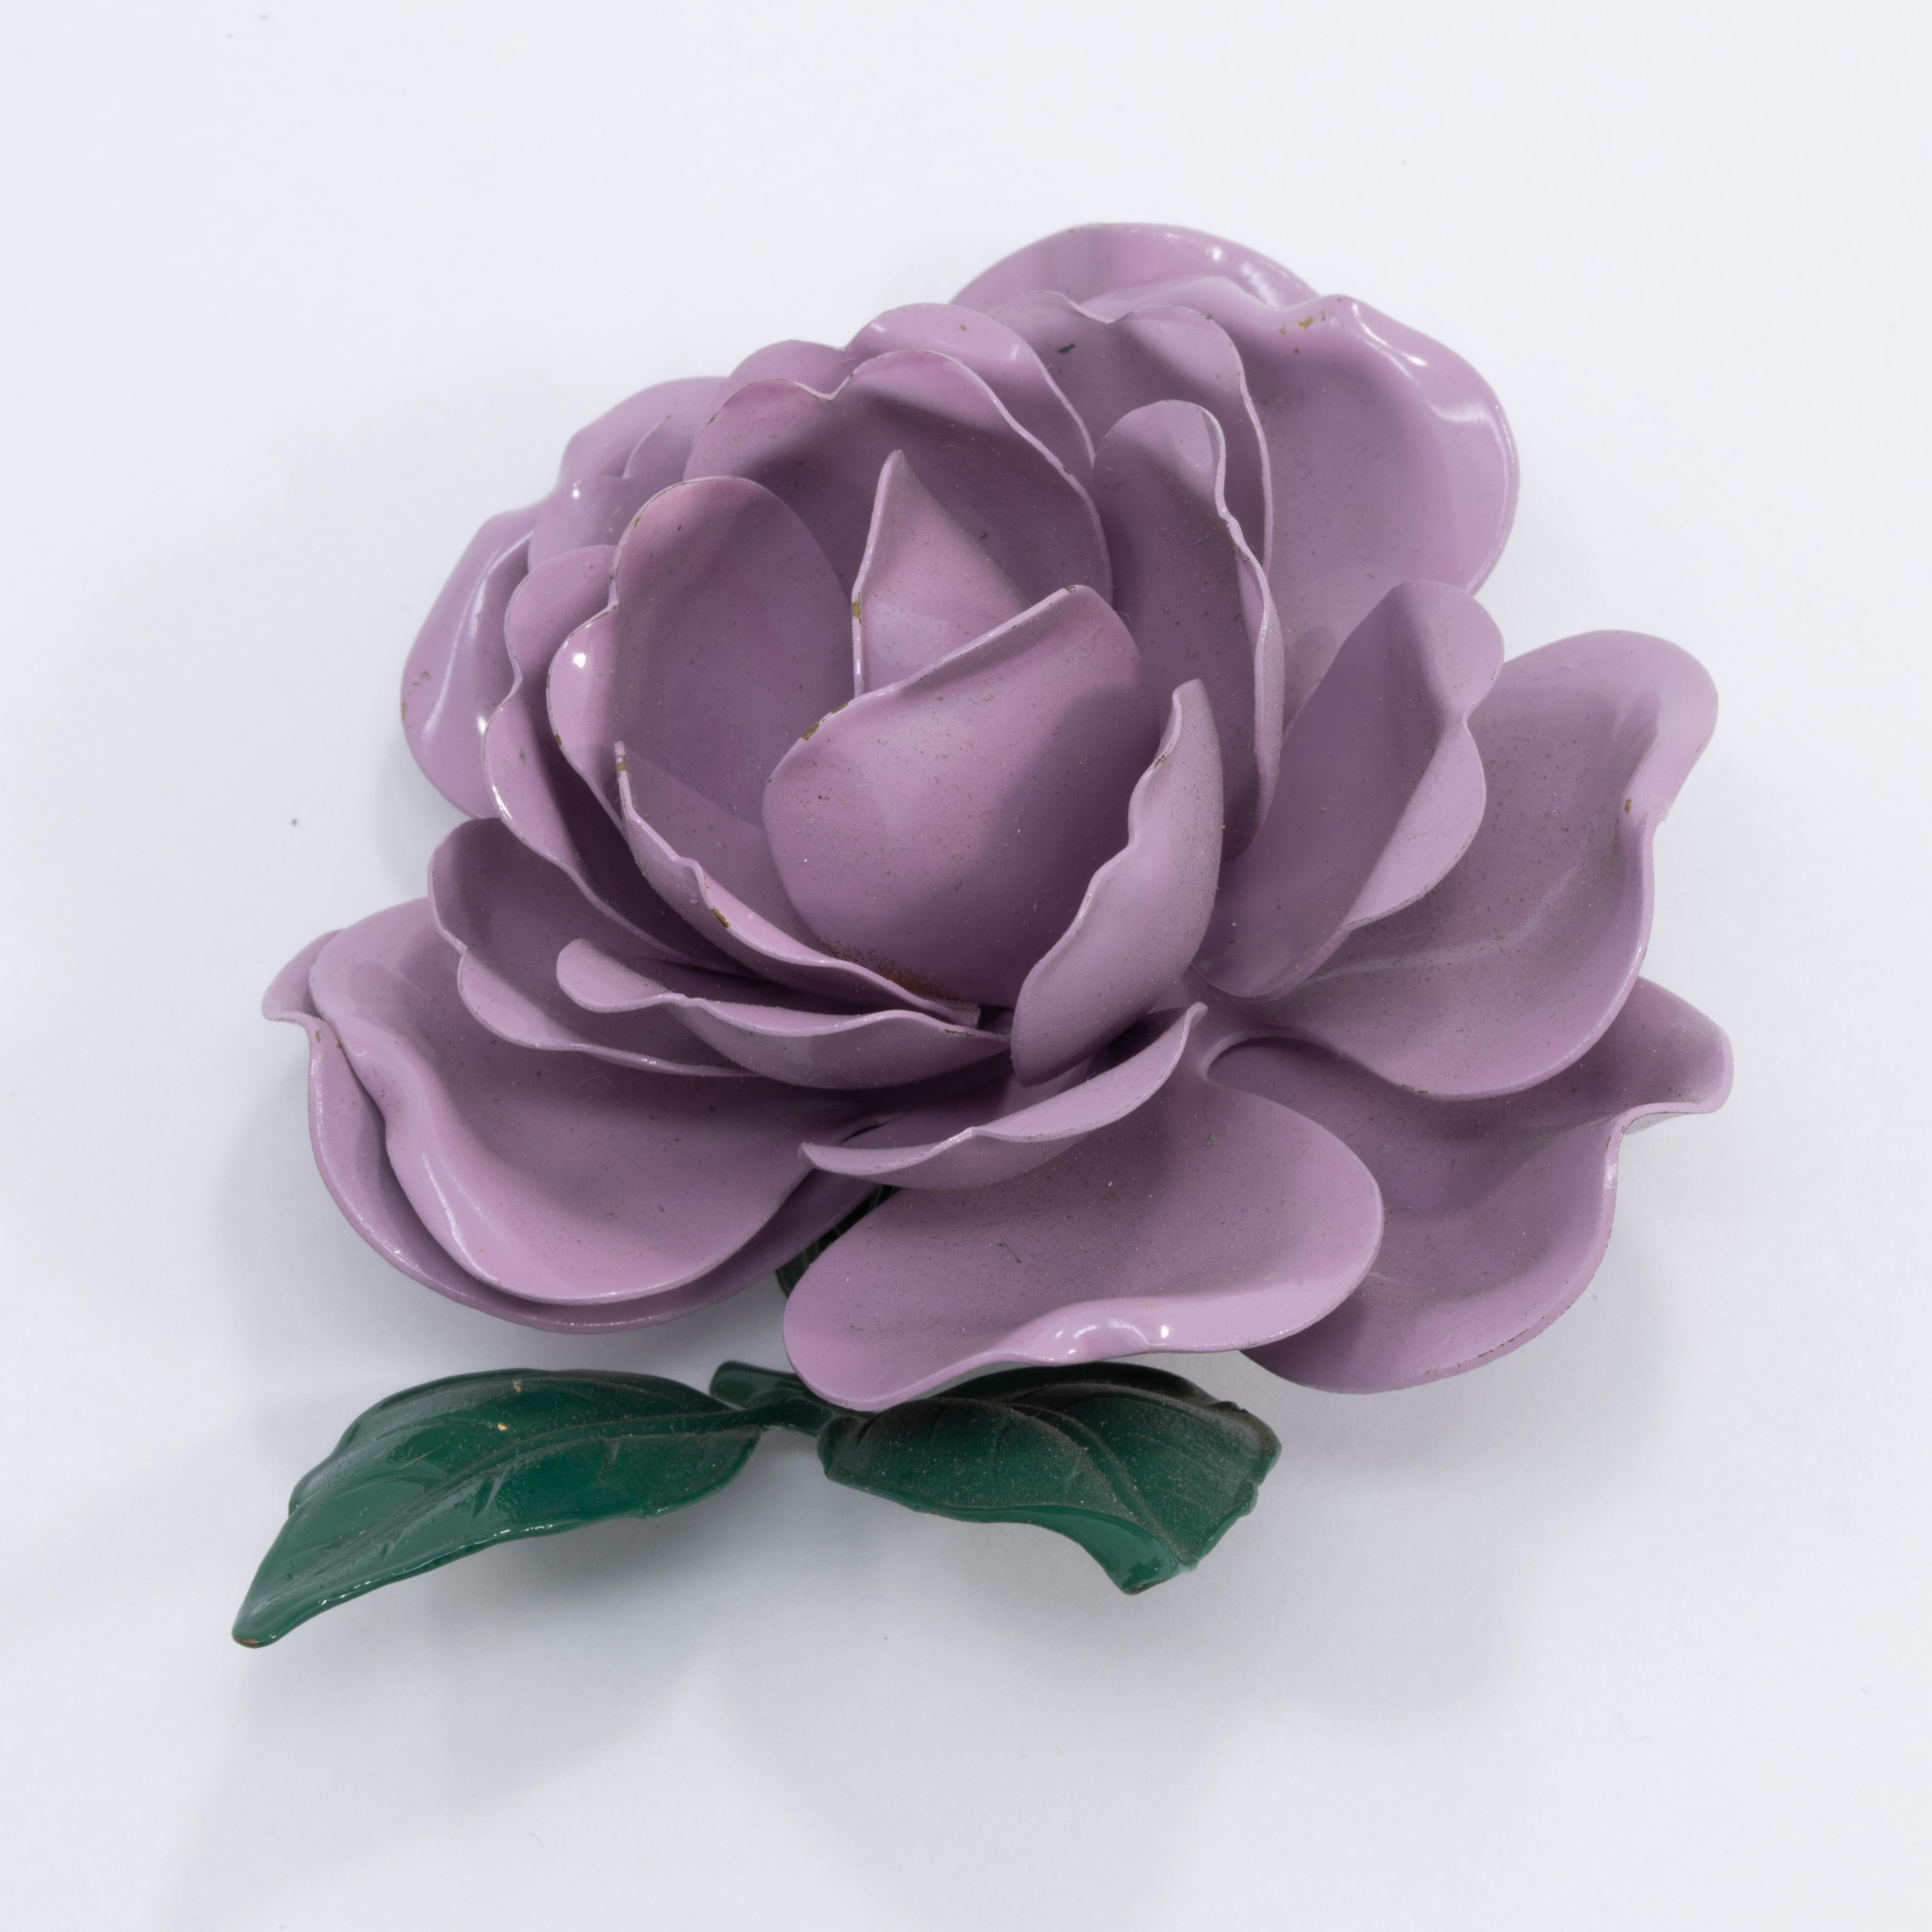 A blooming rose painted in purple and green enamel. This stylish pin brooch is the perfect touch of retro flair!

Gold-tone.

